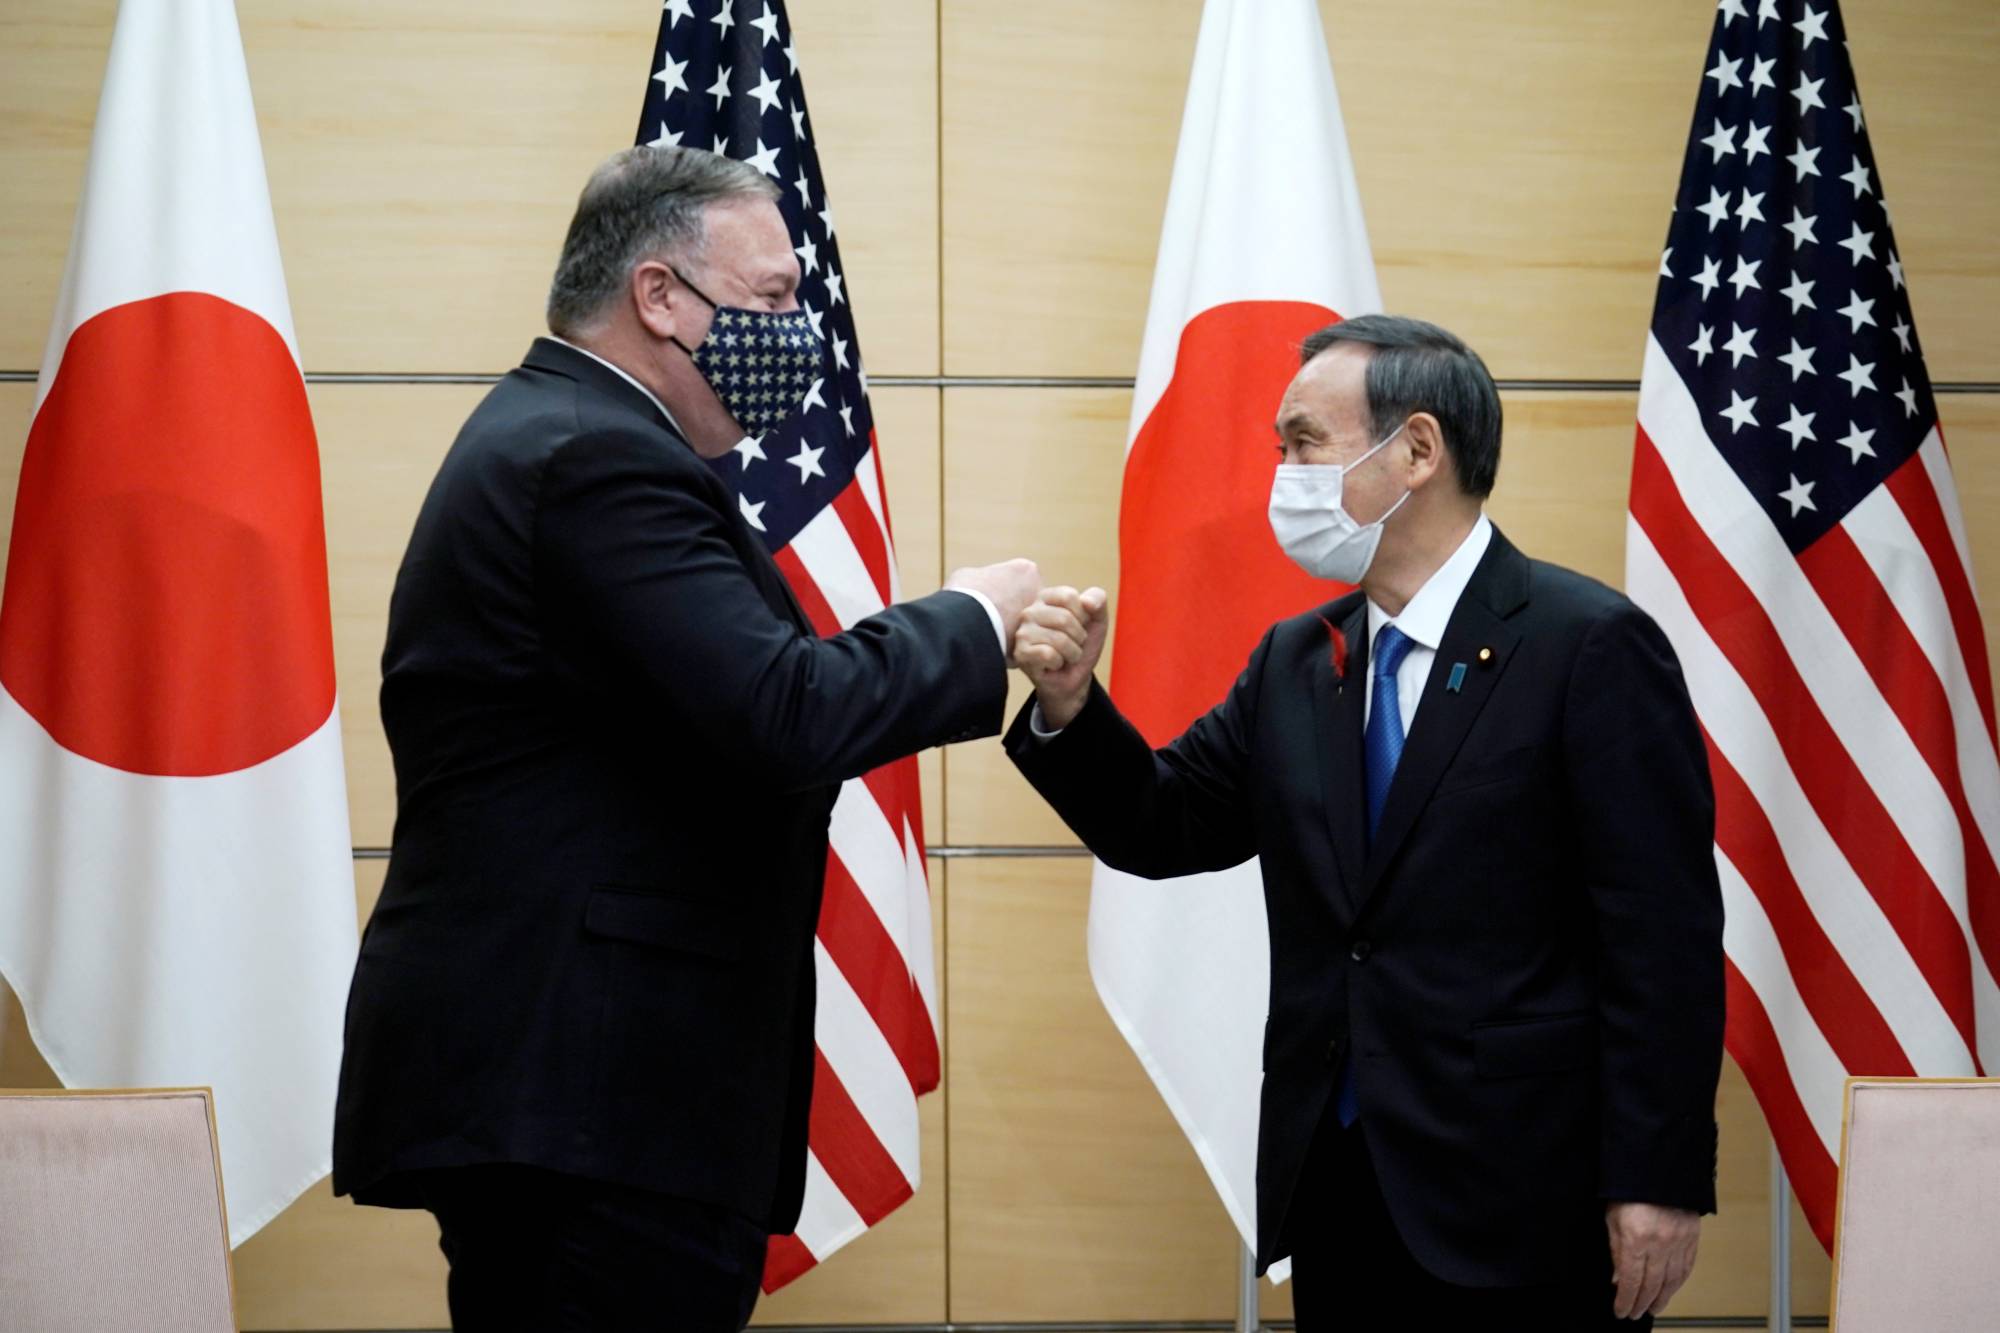 Prime Minister Yoshihide Suga and U.S. Secretary of State Mike Pompeo greet each other prior to their meeting at the Prime Minister's Office on Tuesday. | POOL / VIA REUTERS